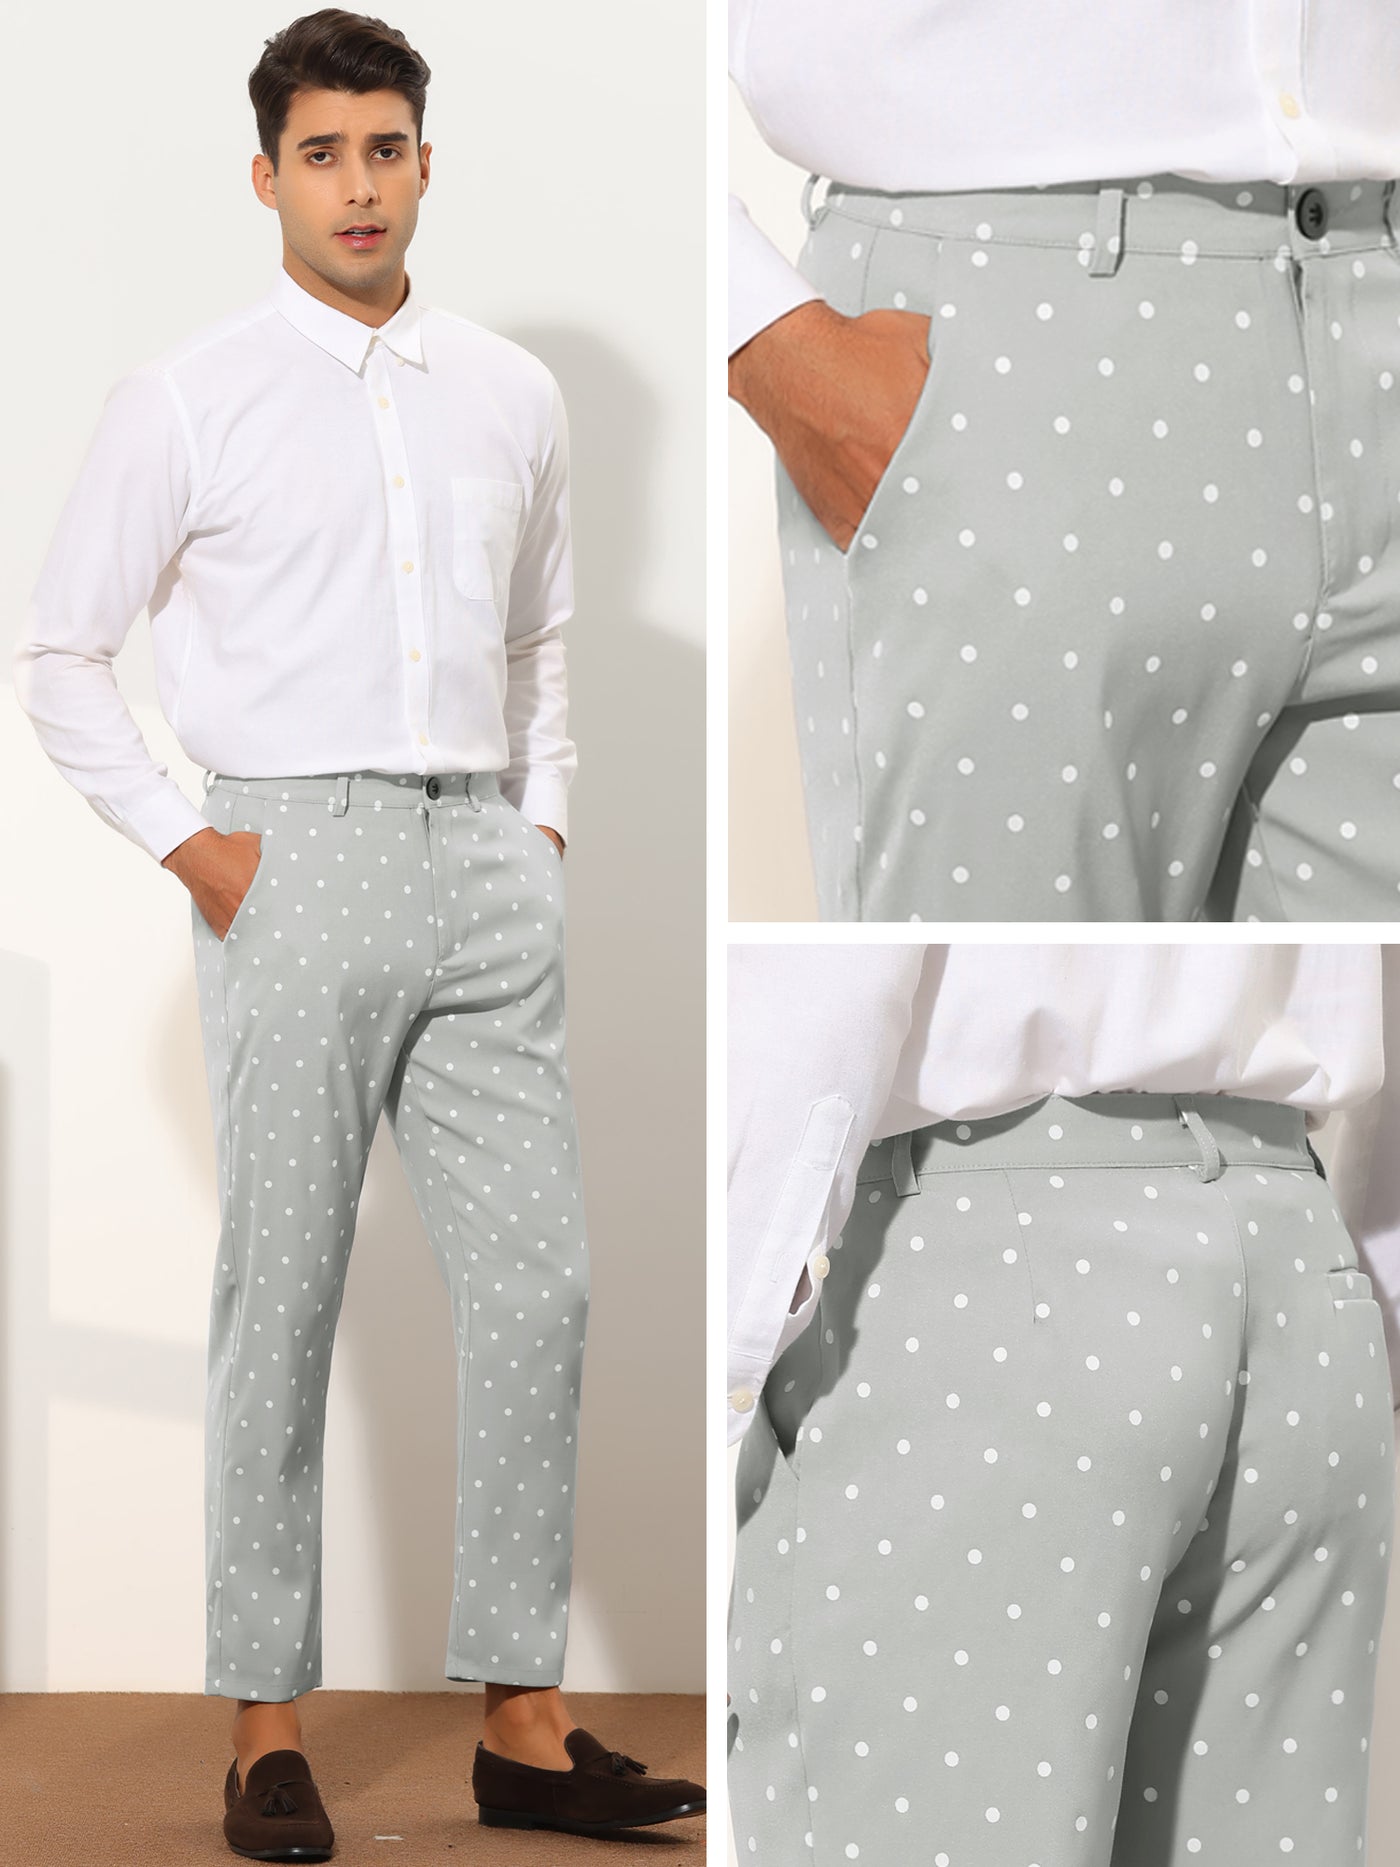 Bublédon Polka Dots Dress Pants for Men's Flat Front Slim Fit Business Printed Tapered Trousers